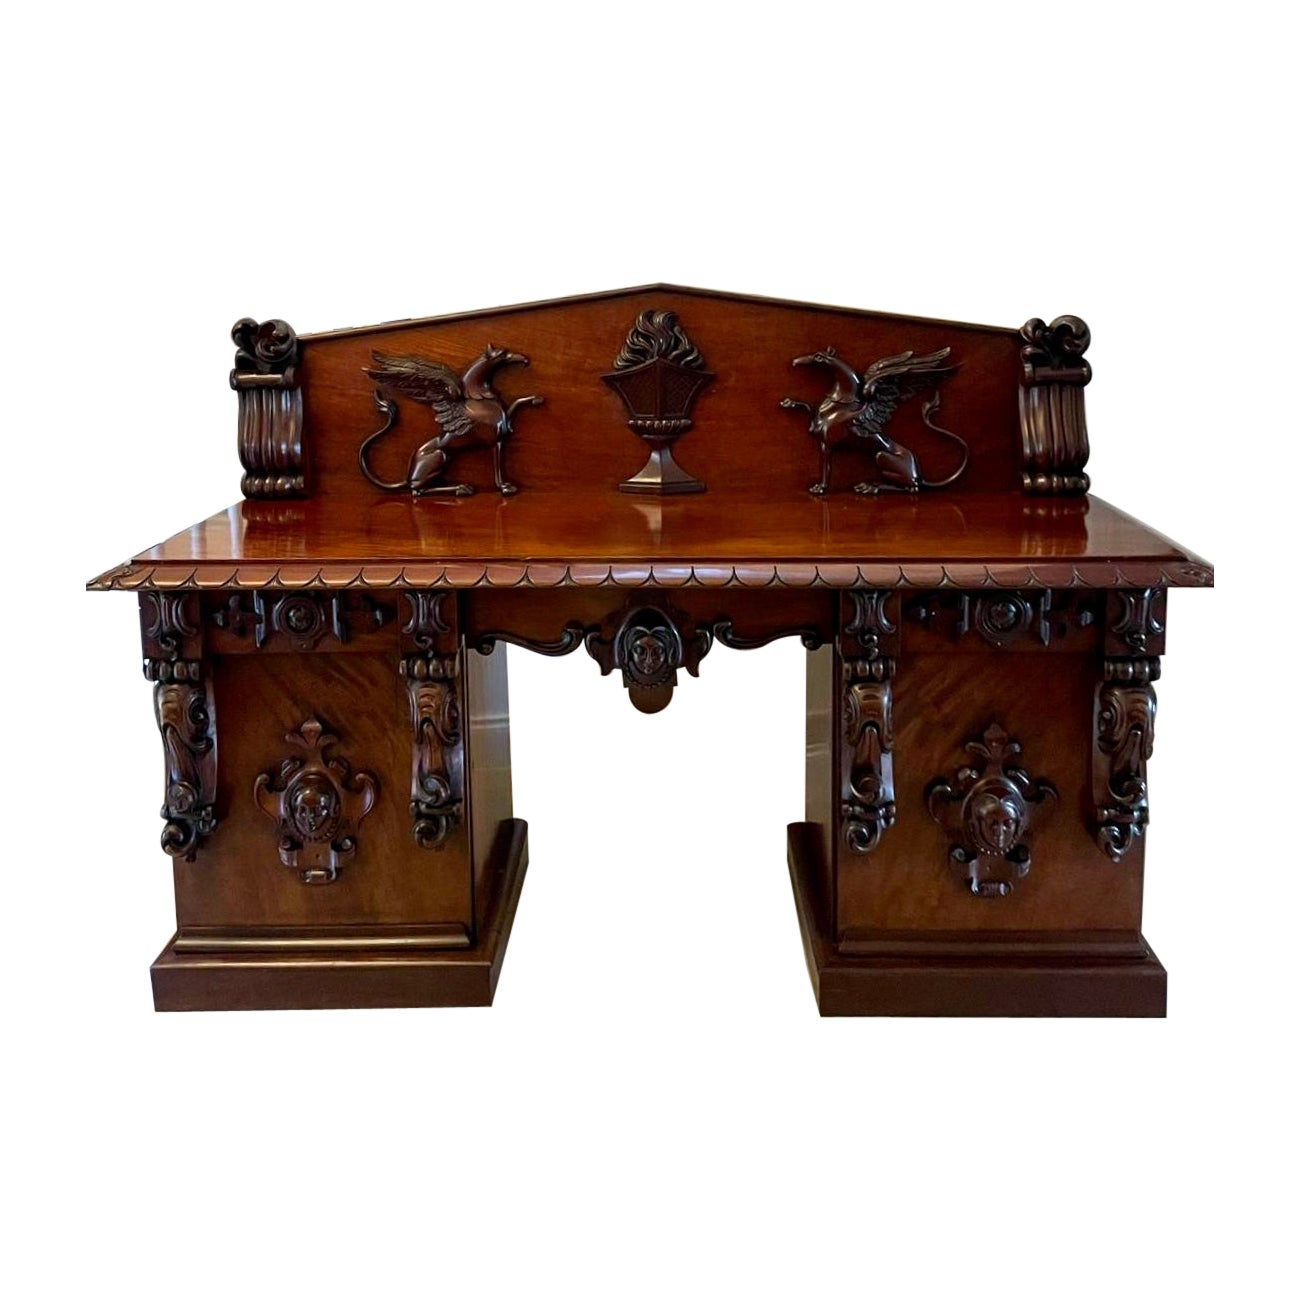 Magnificent Quality Antique William iv Carved Mahogany Sideboard For Sale